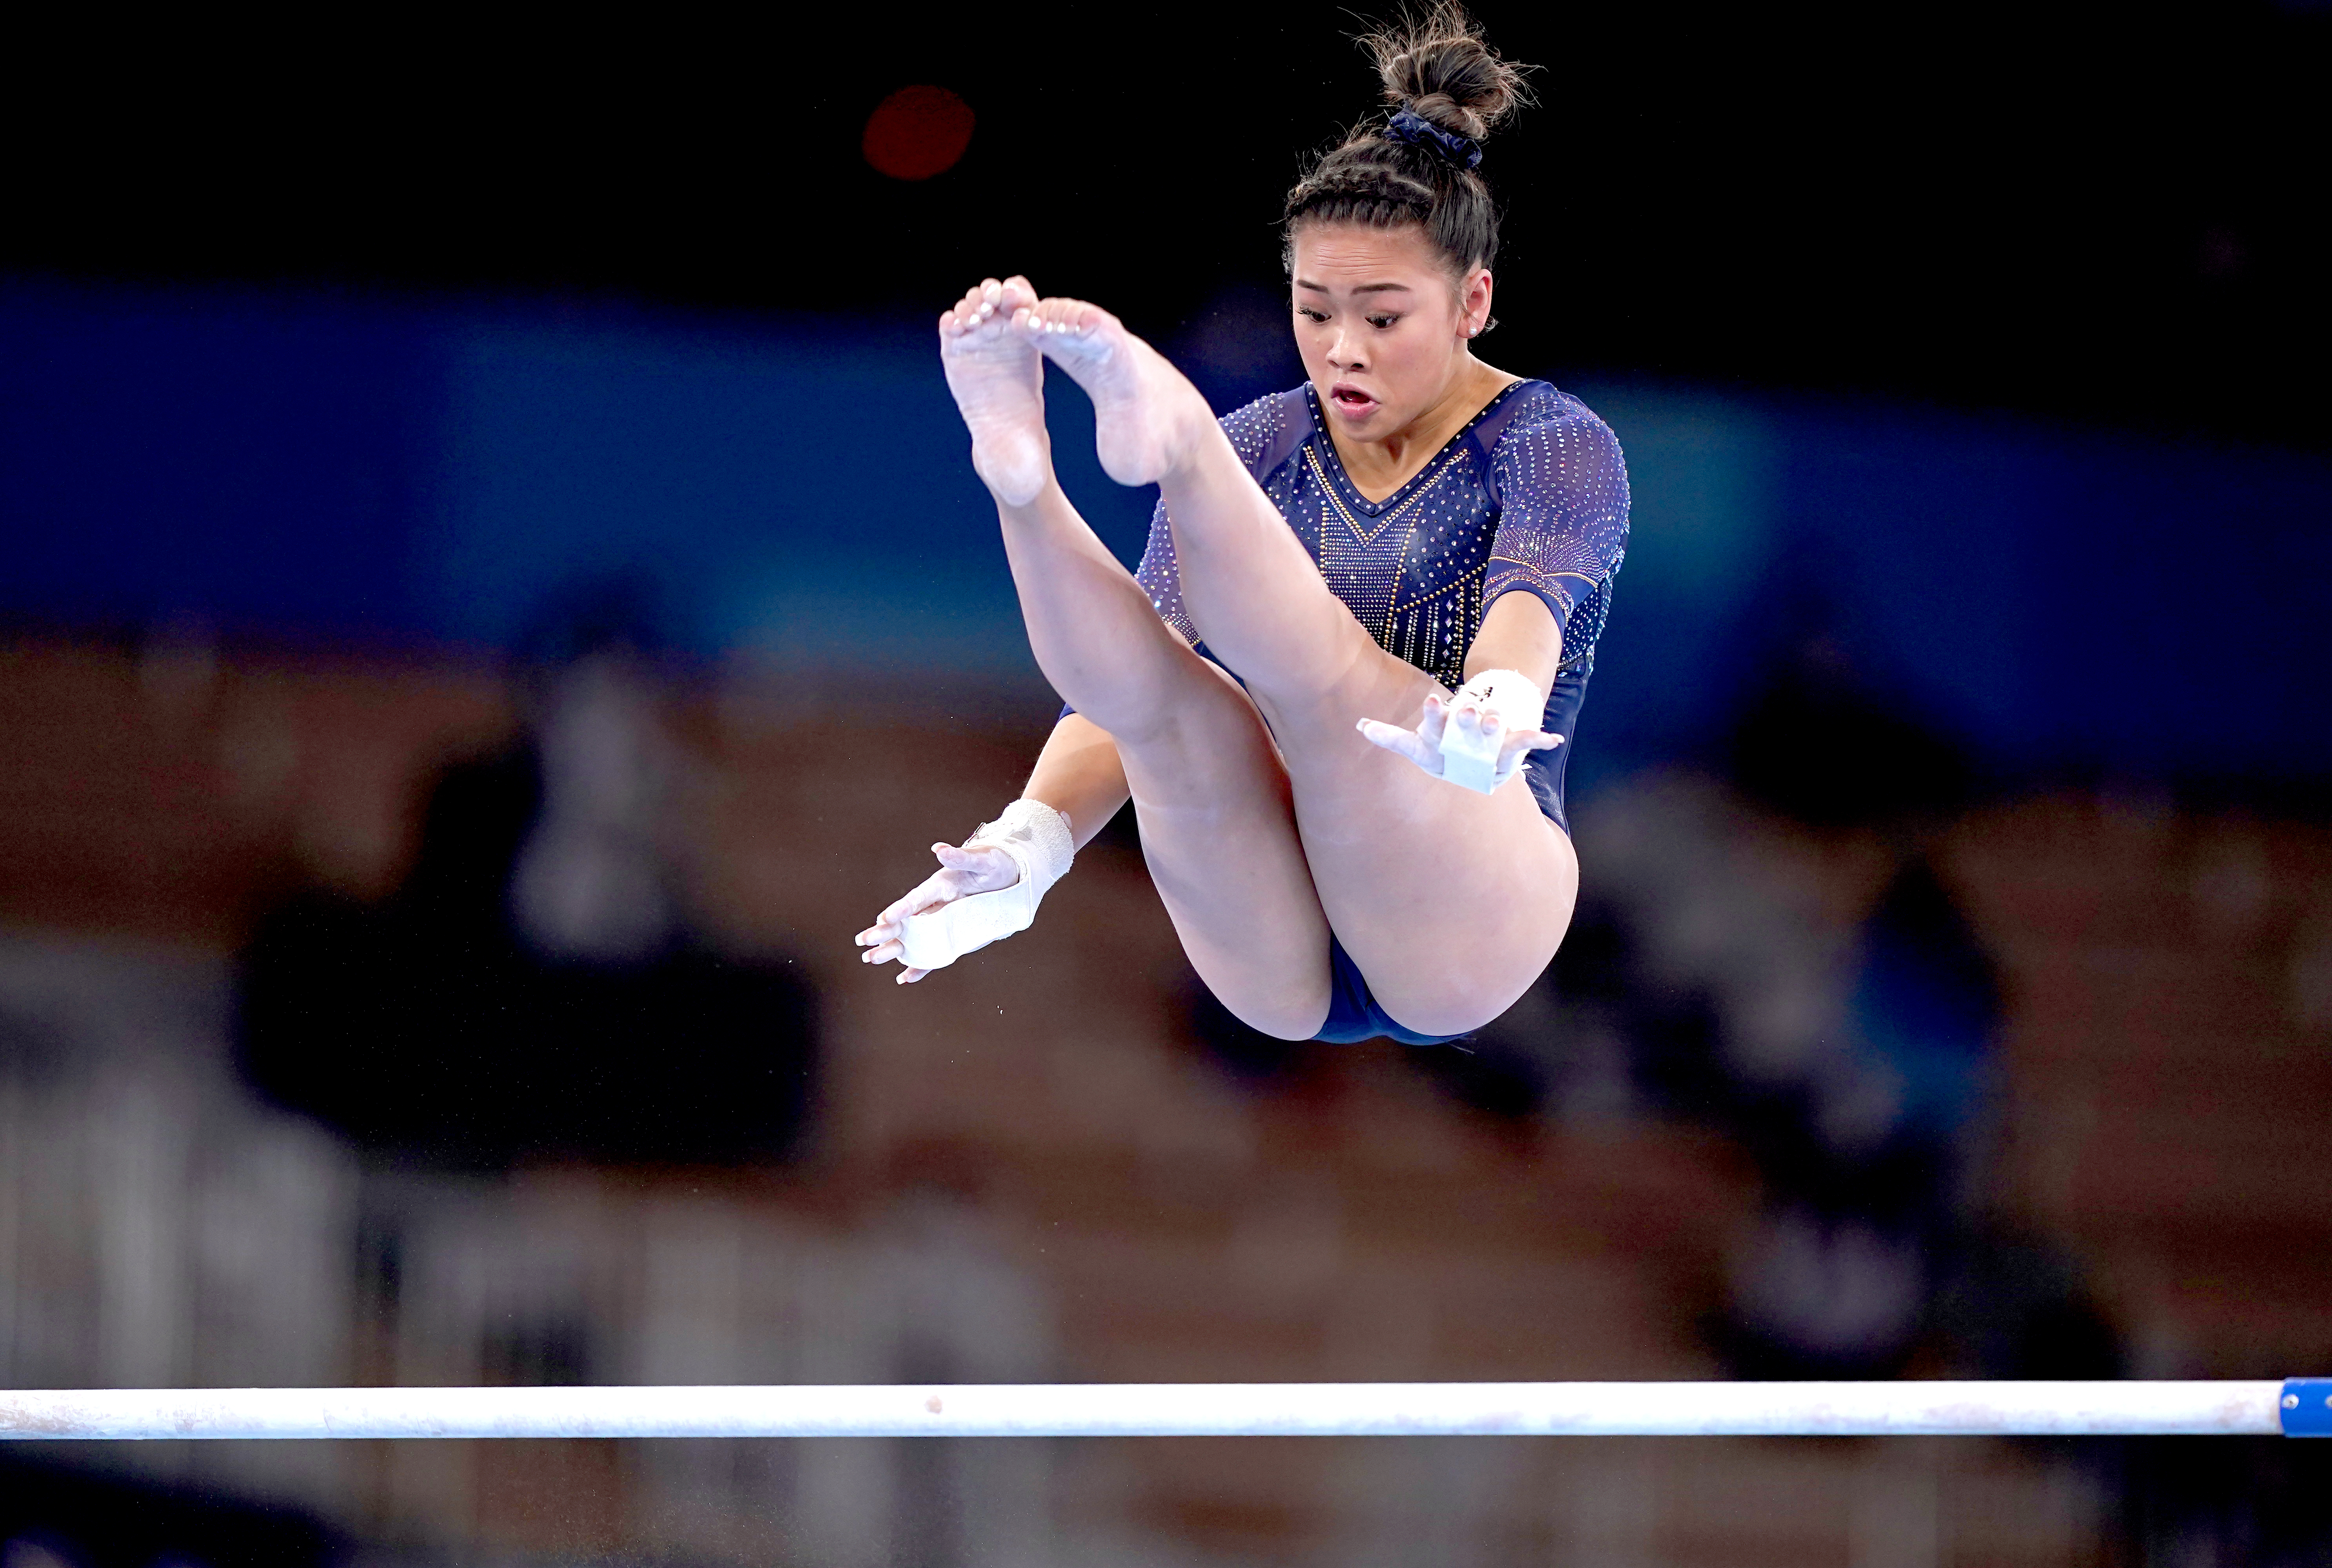 USA's Sunisa Lee during the Women's Uneven Bars Final